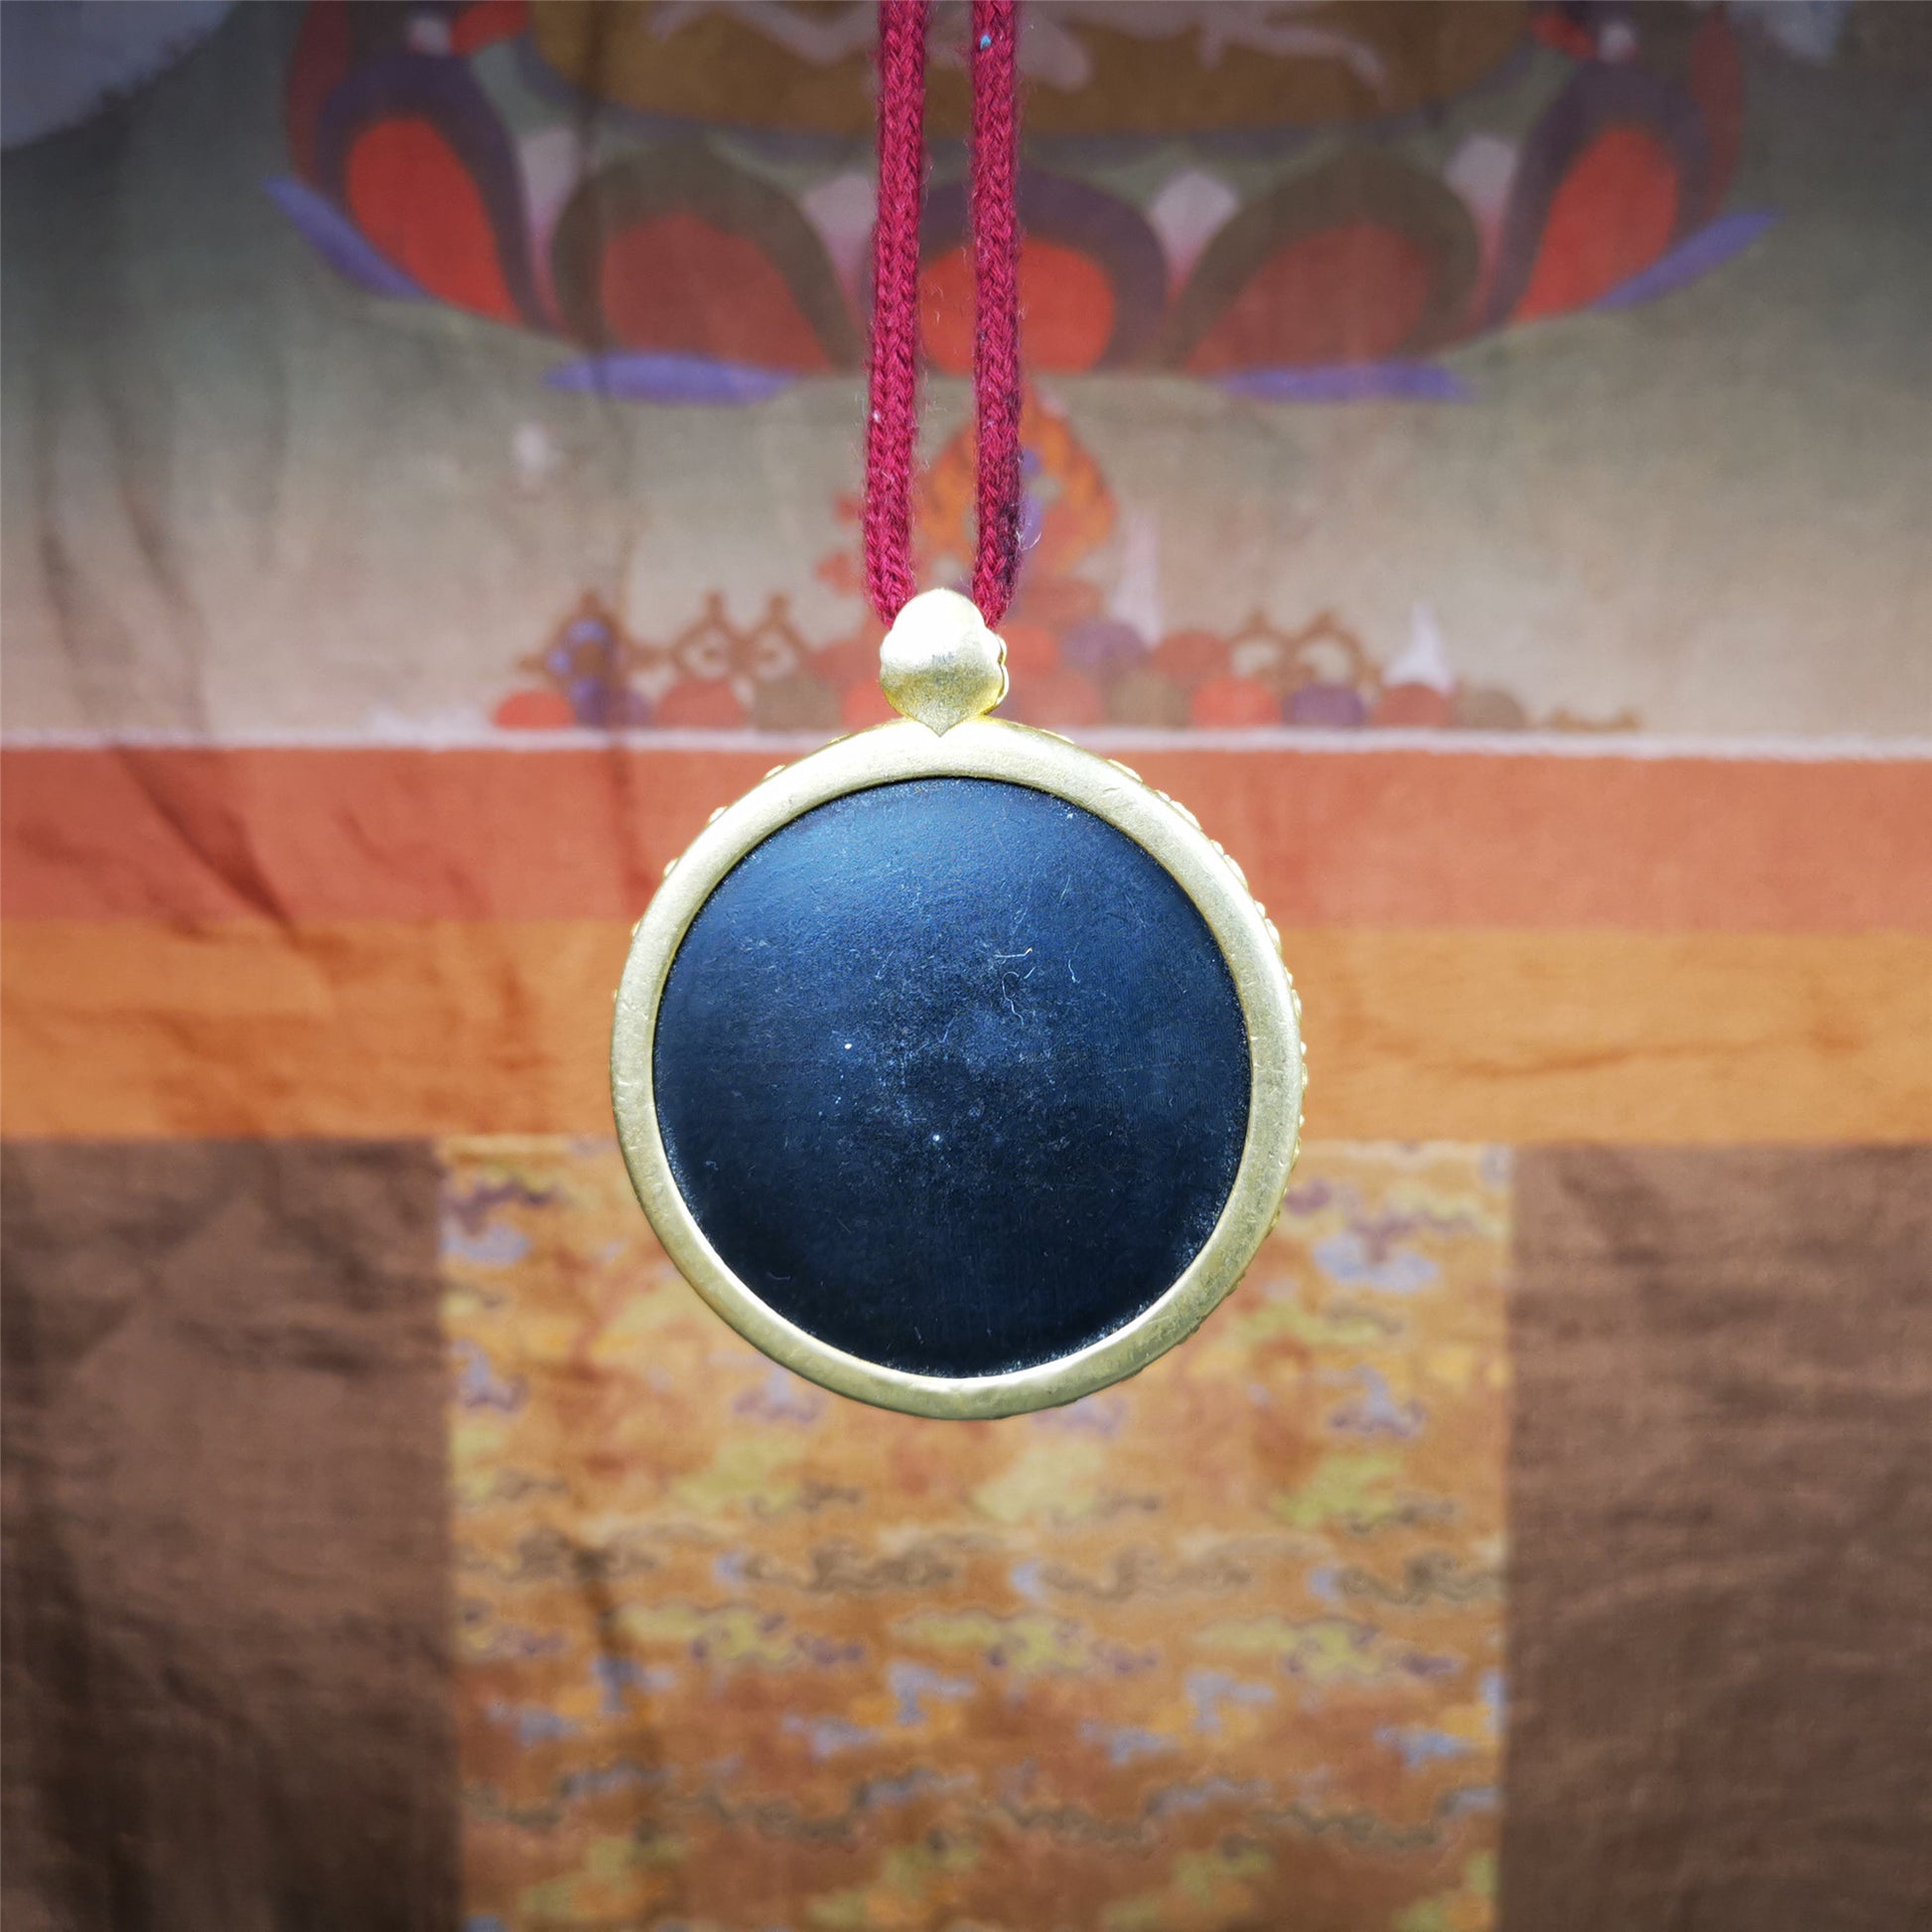 This badge is made by Tibetan craftsmen and come from Hepo Town, Baiyu County,Tibet. It is made of thokcha, edging with copper,round shape, 2.52 inche diameter. The OM MANI PADME HUM mantra arranged in concentric circles.